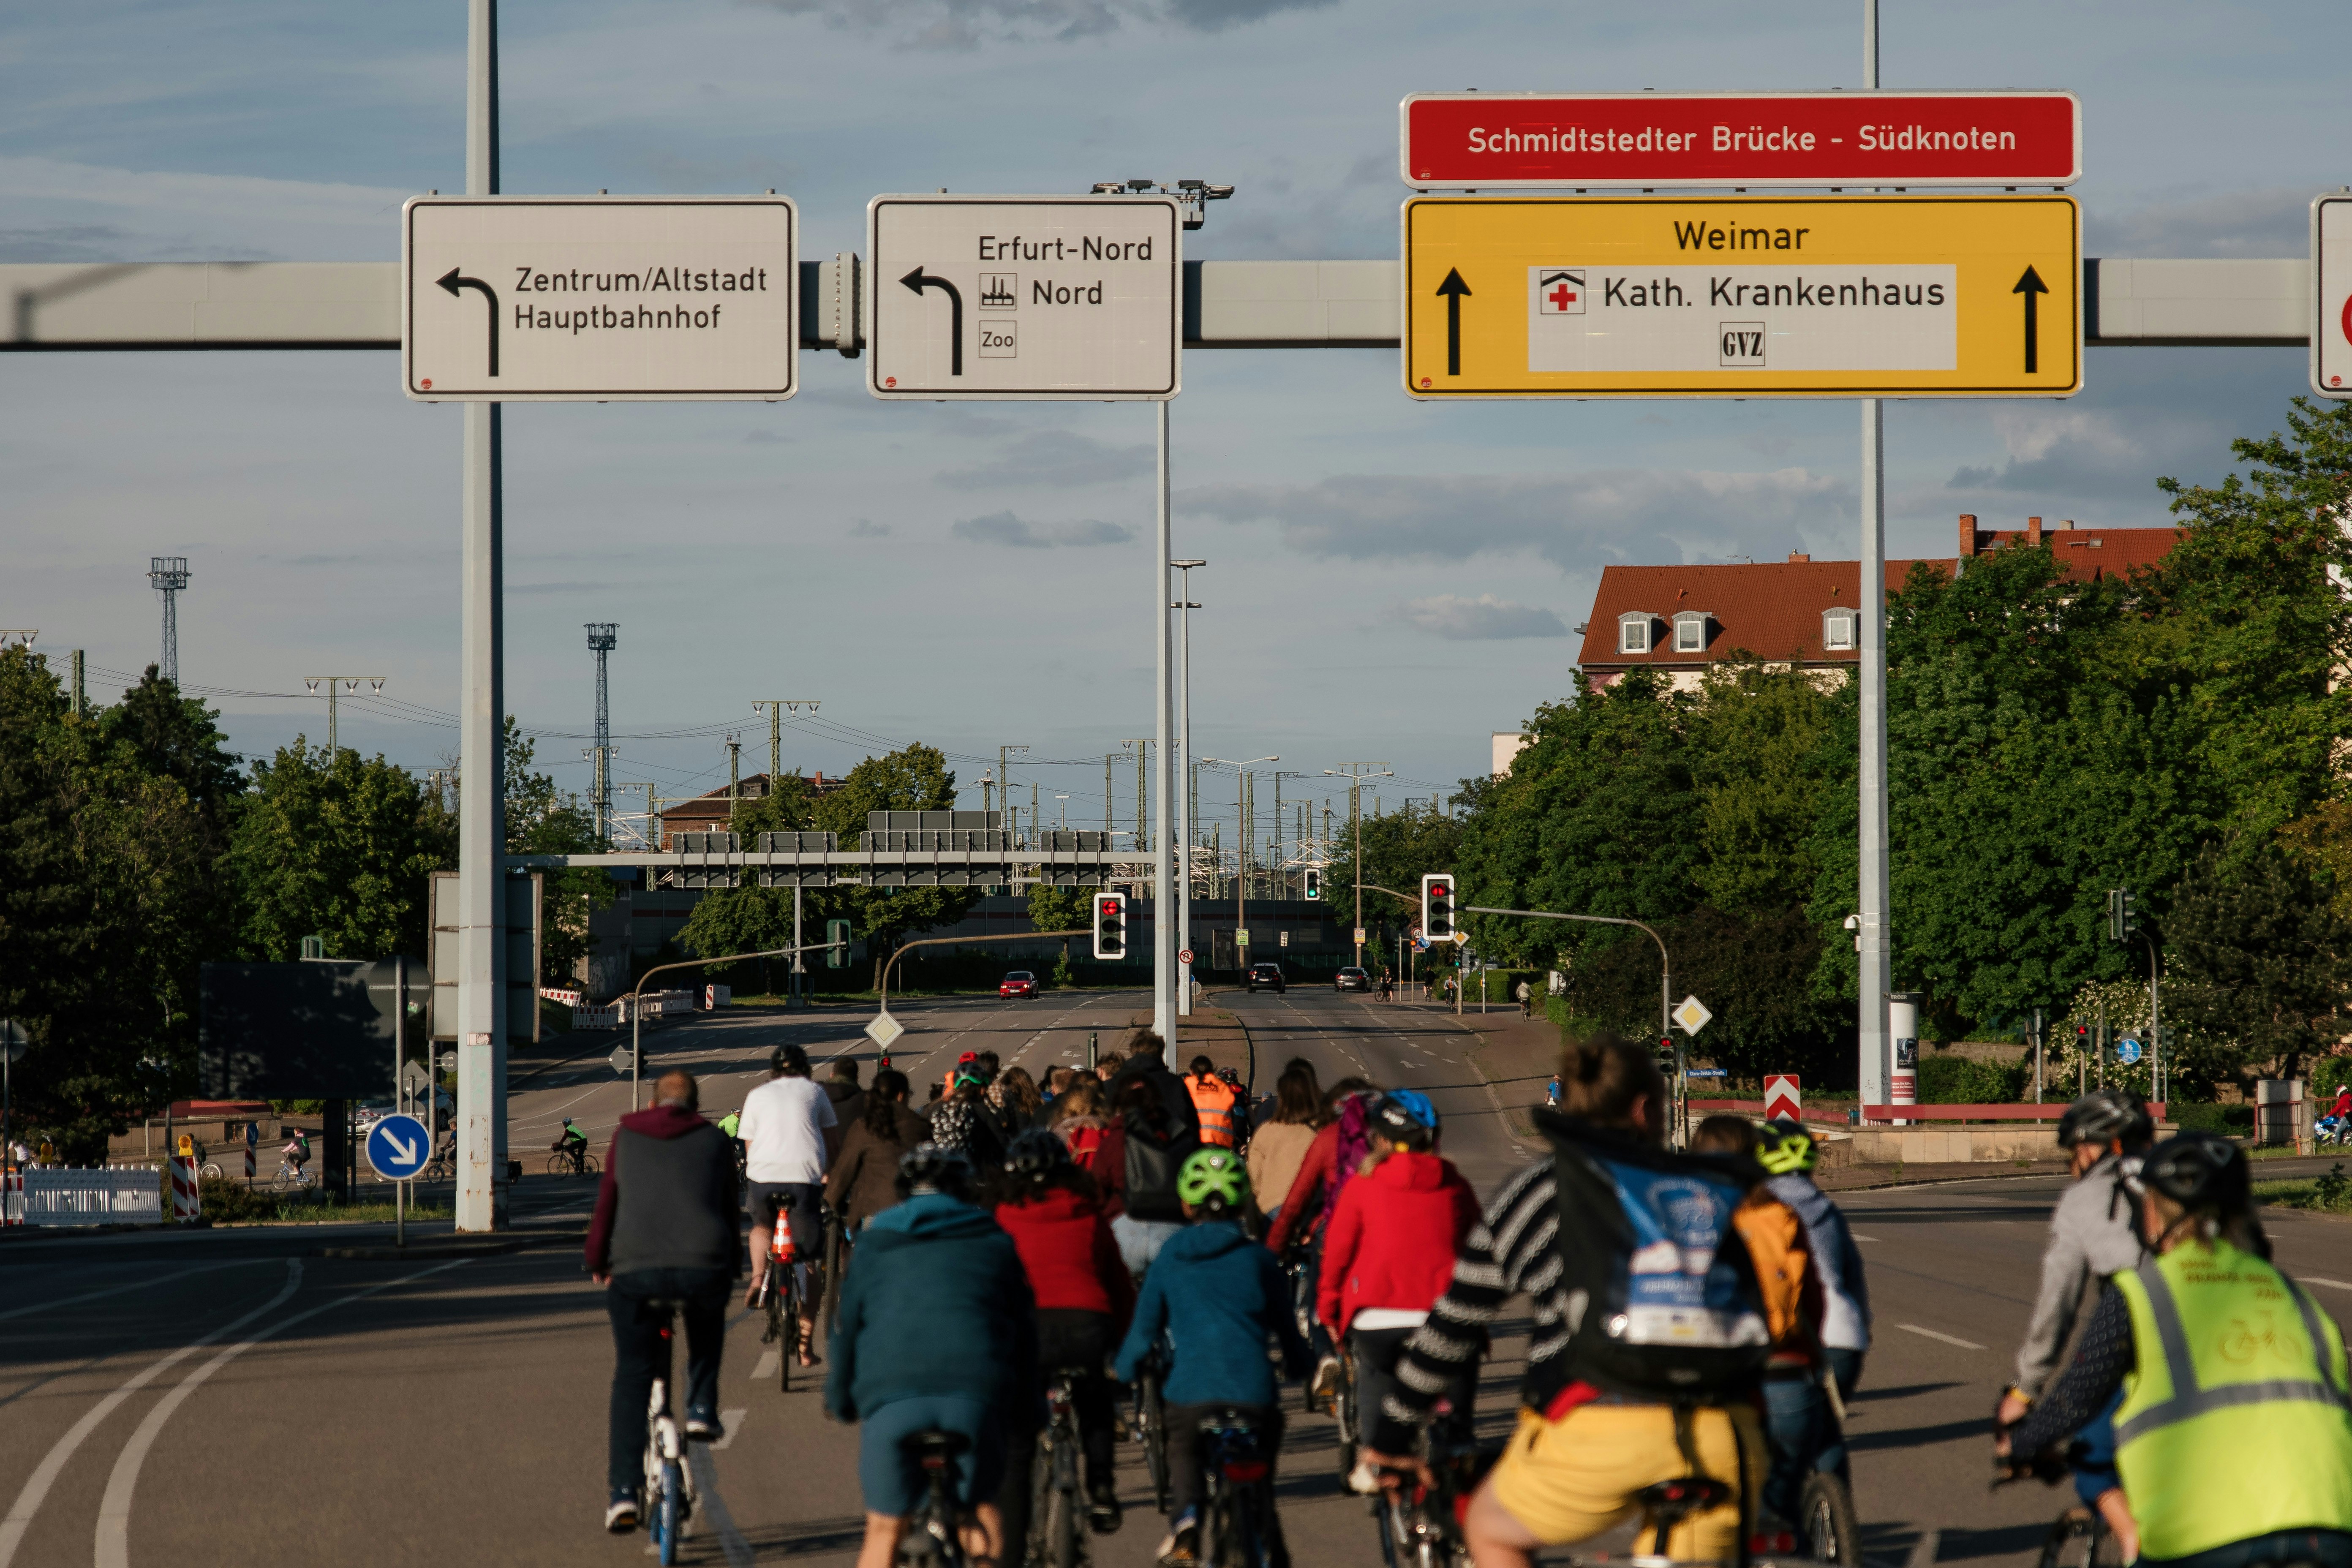 Critical Mass demonstration in Erfurt on the 29th of June 2020